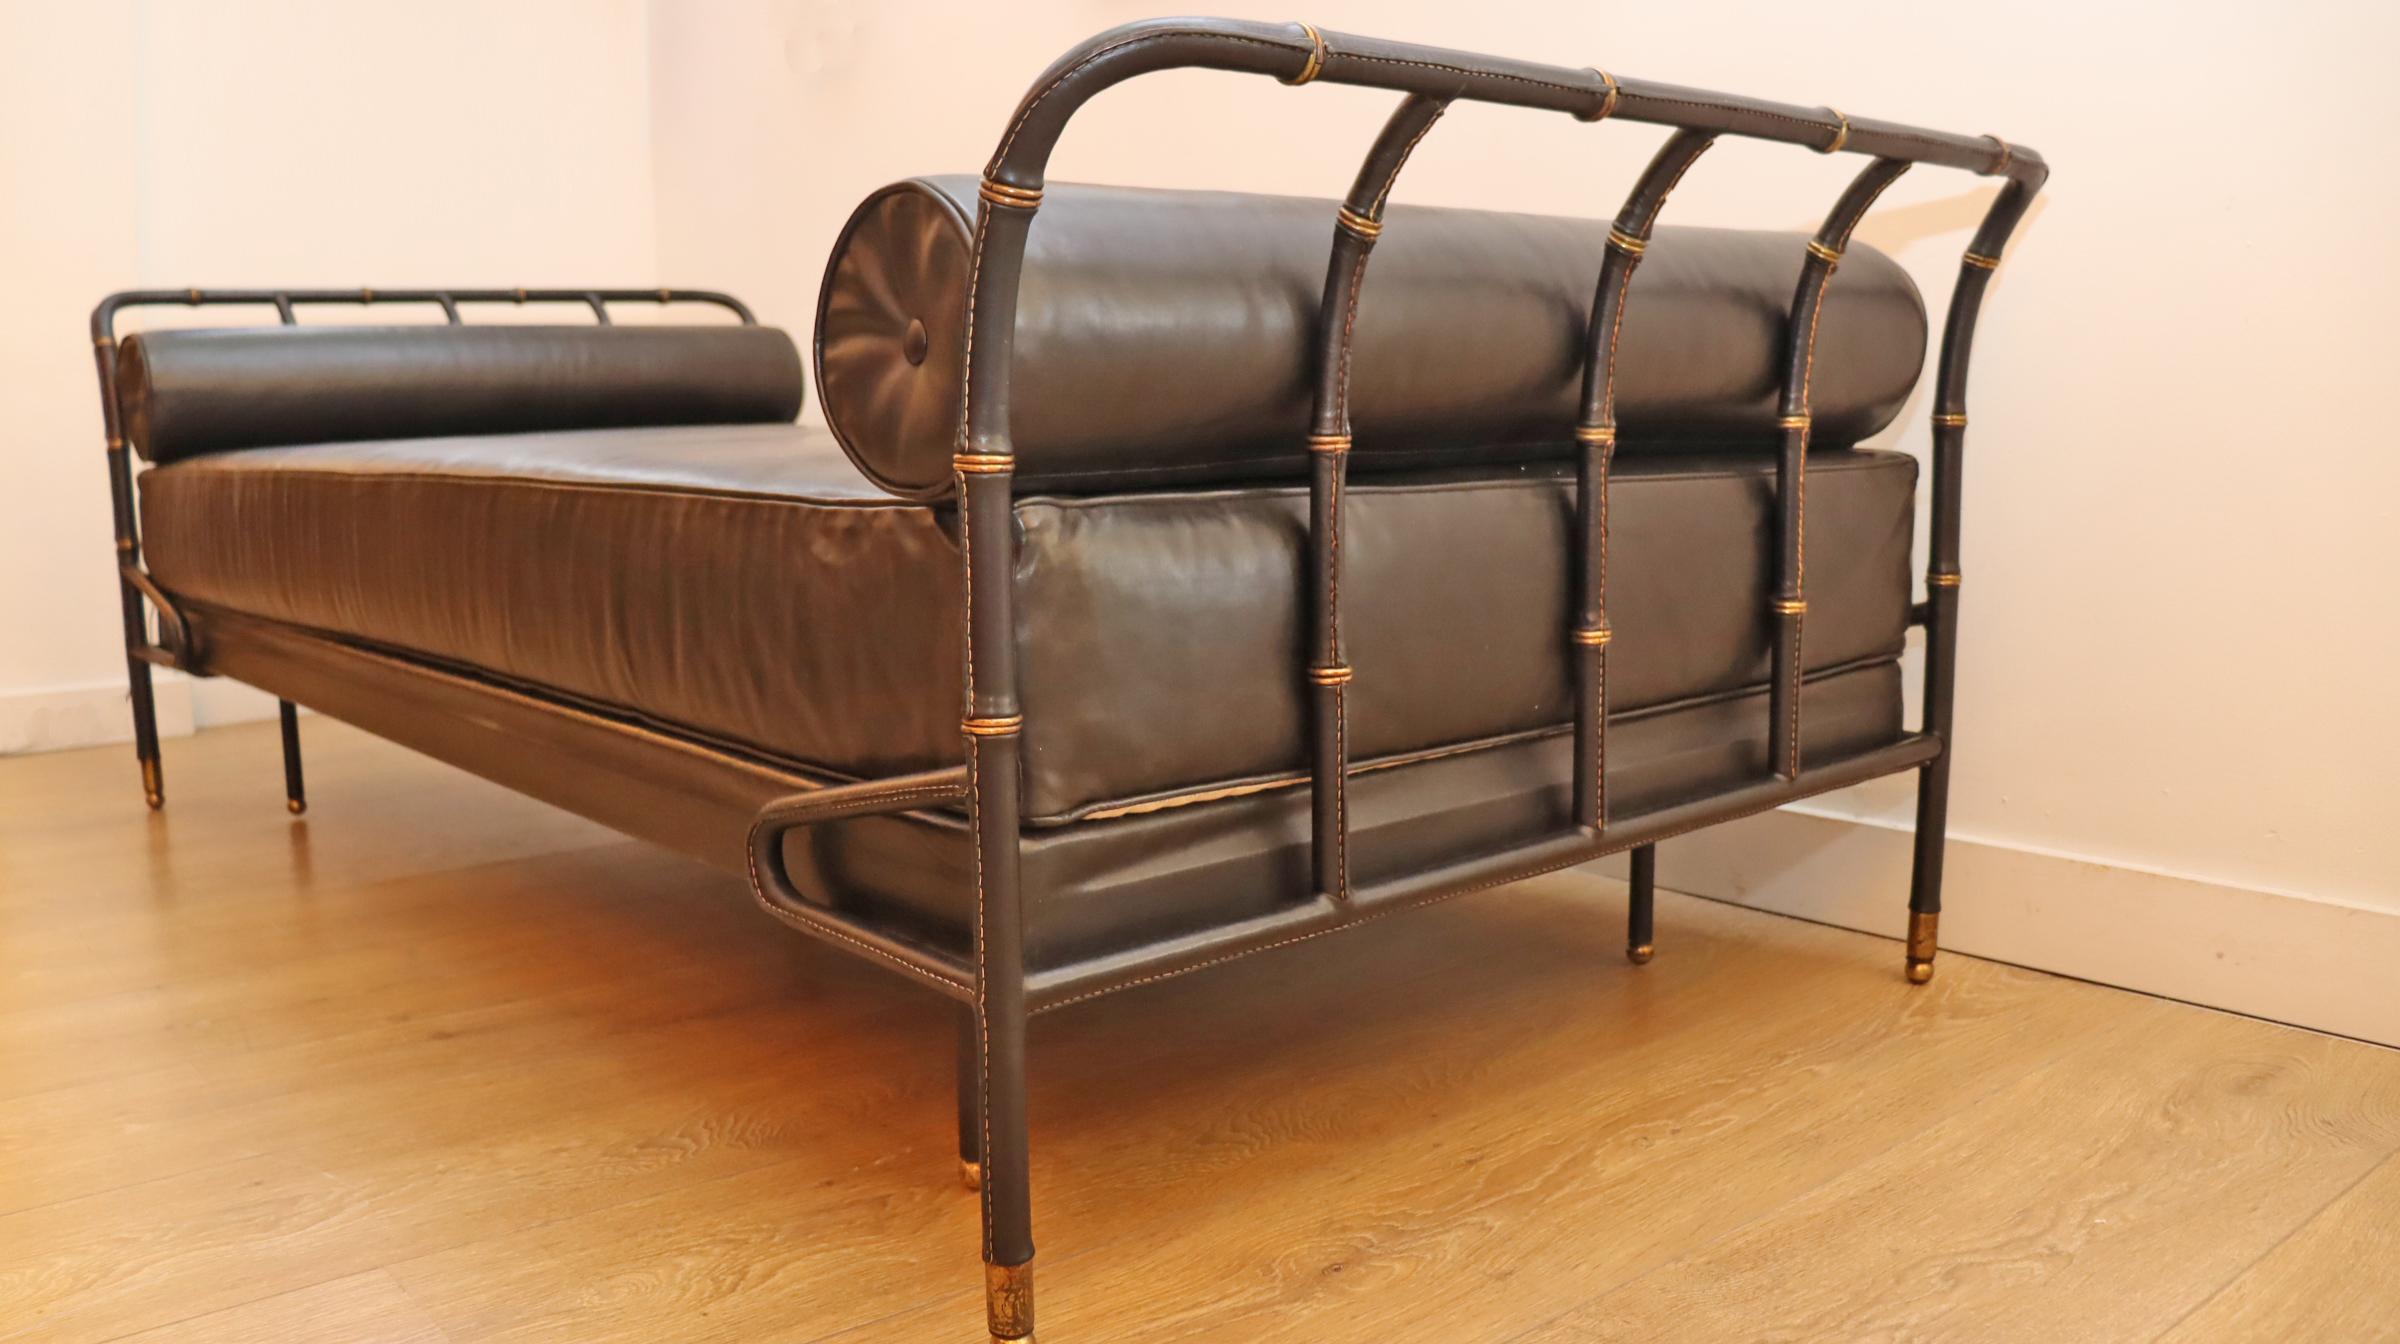 Daybed by Jacques Adnet Black Stitched Leather and Brass, France 1950 In Excellent Condition For Sale In Miami, FL